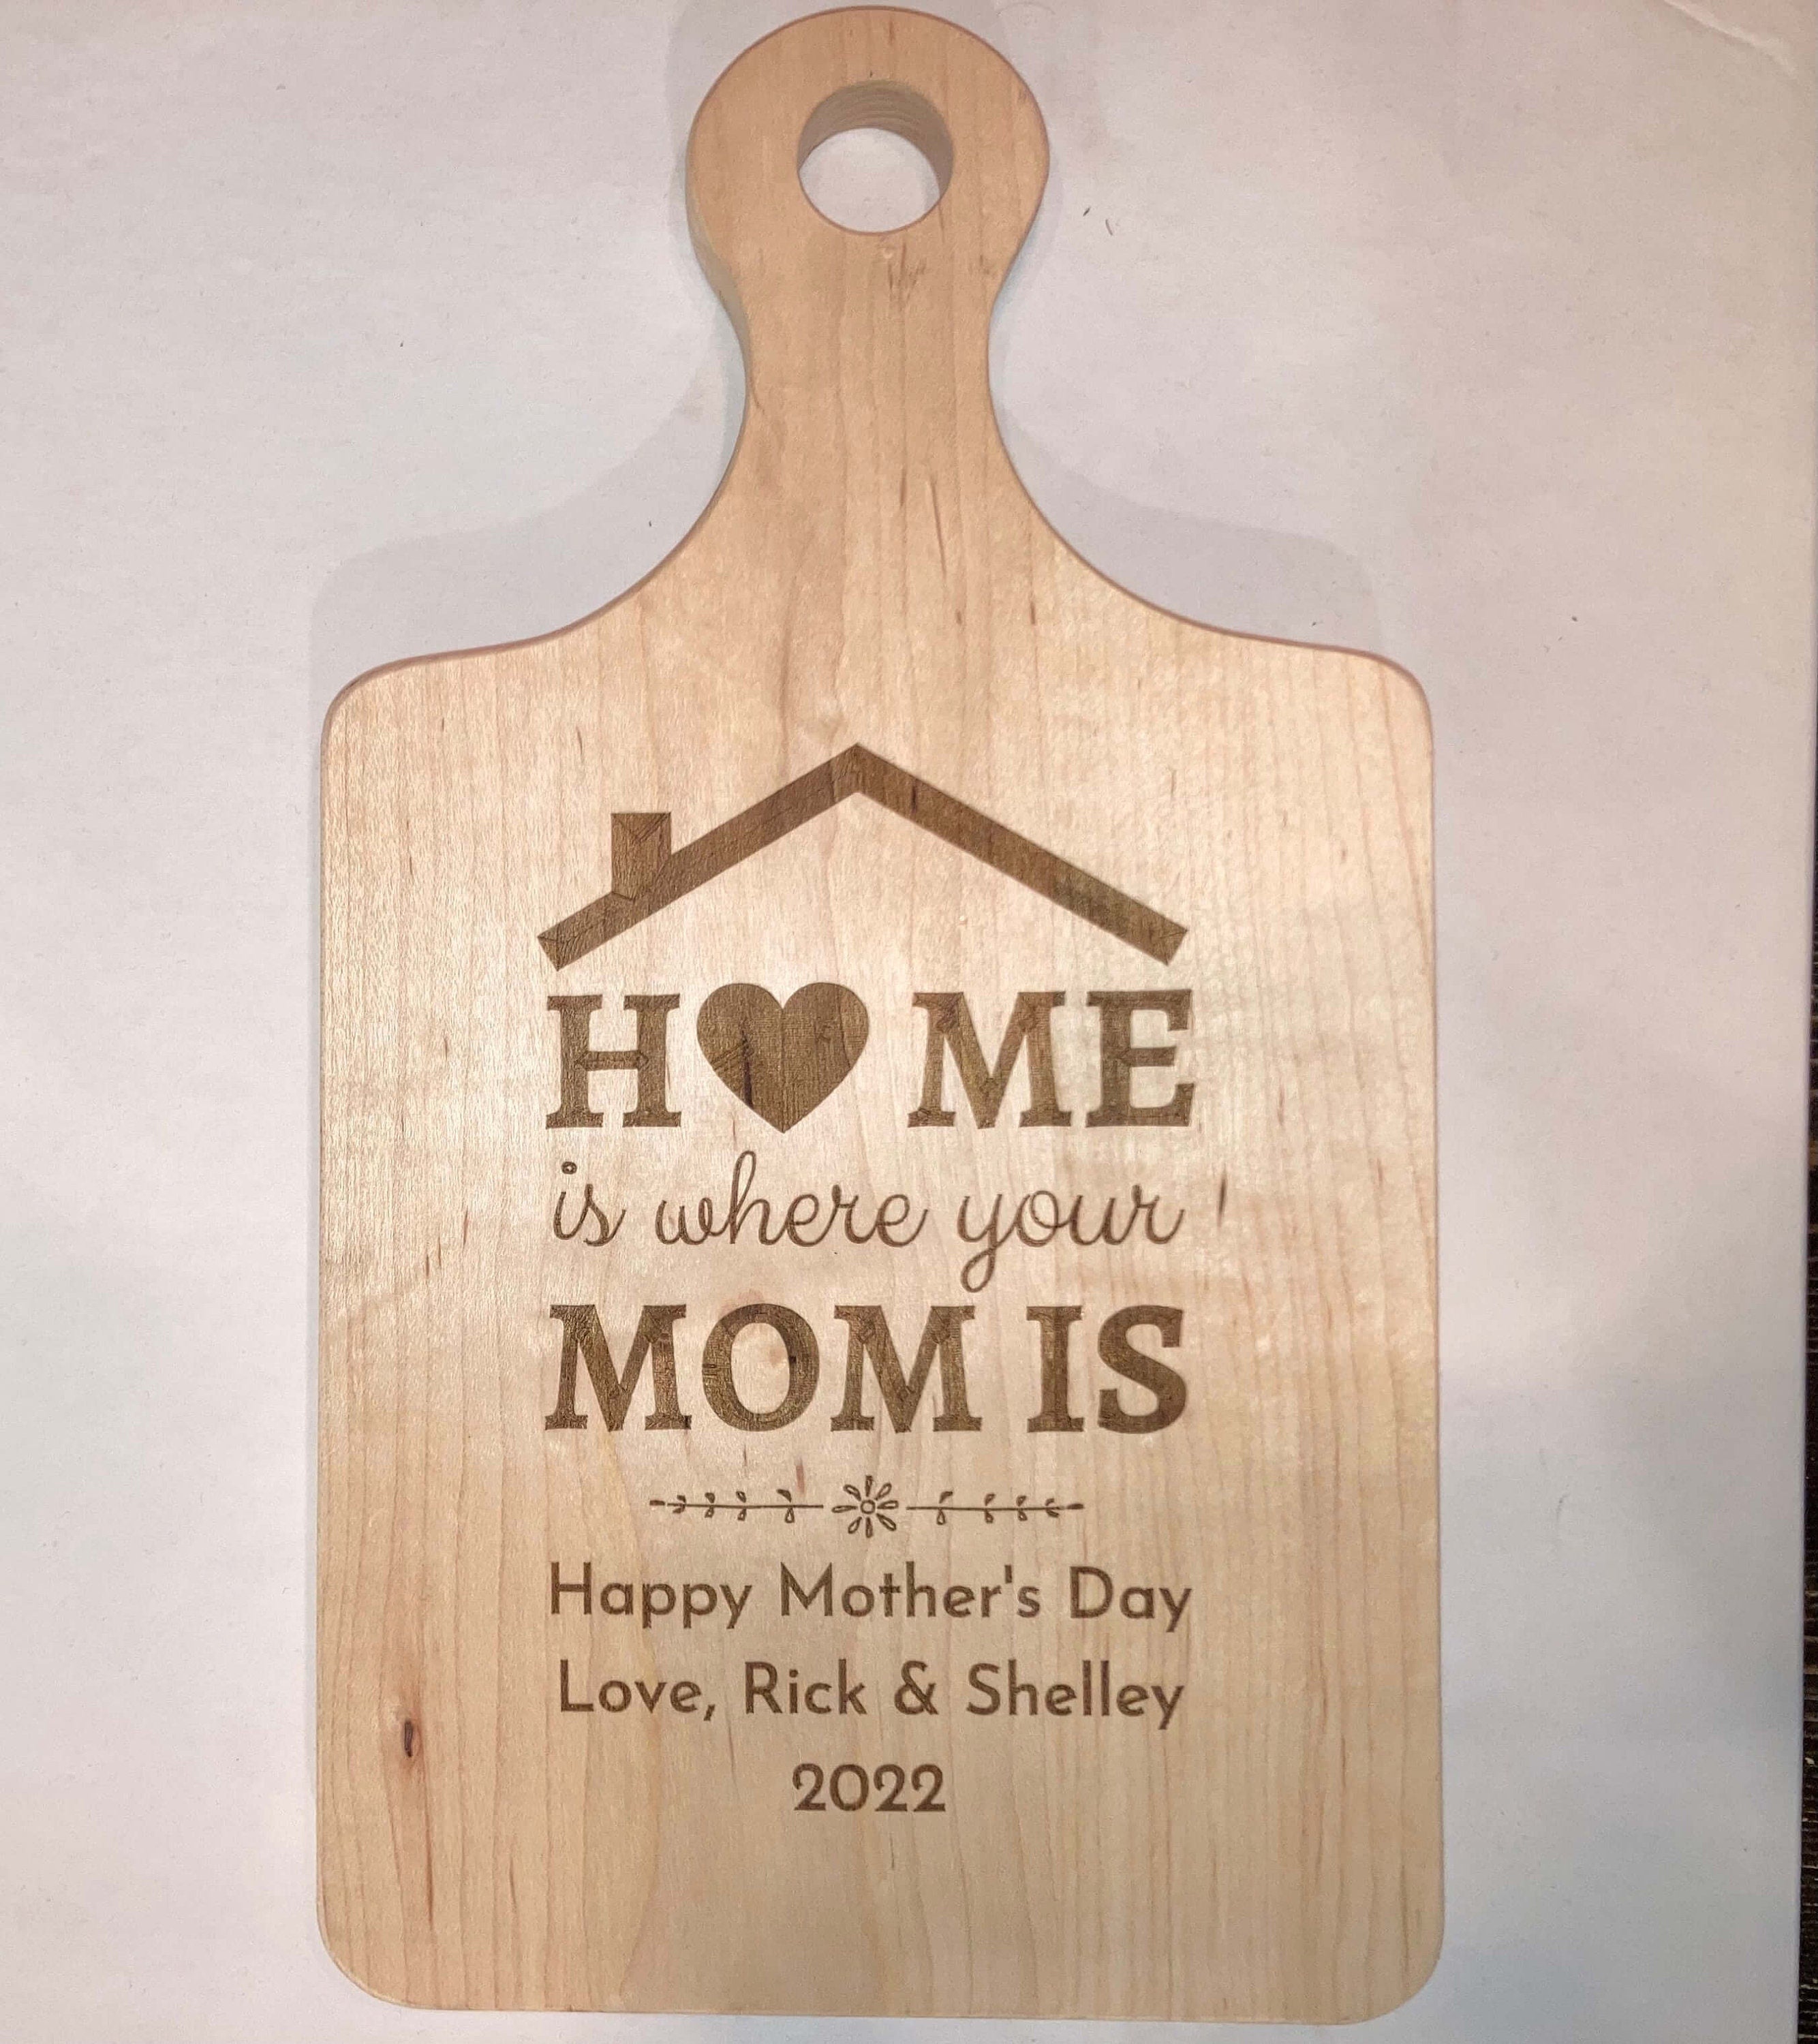 20 Great Ideas for Personalized Gifts - MY 100 YEAR OLD HOME